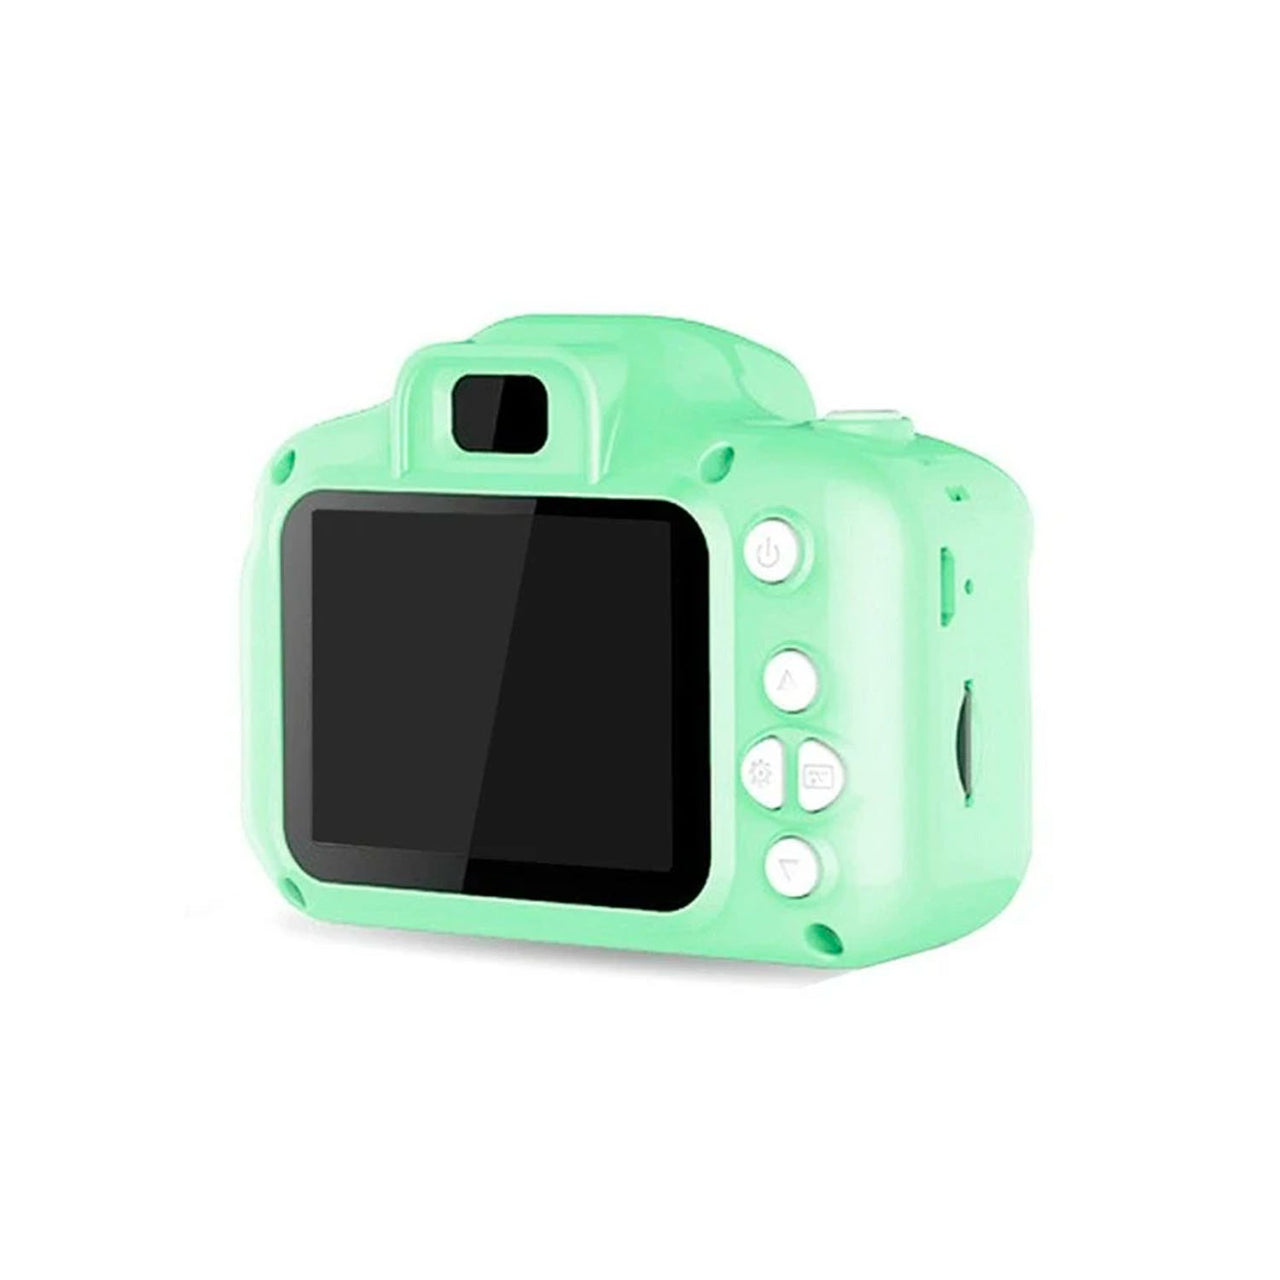 A real camera made to fit the hands of kids